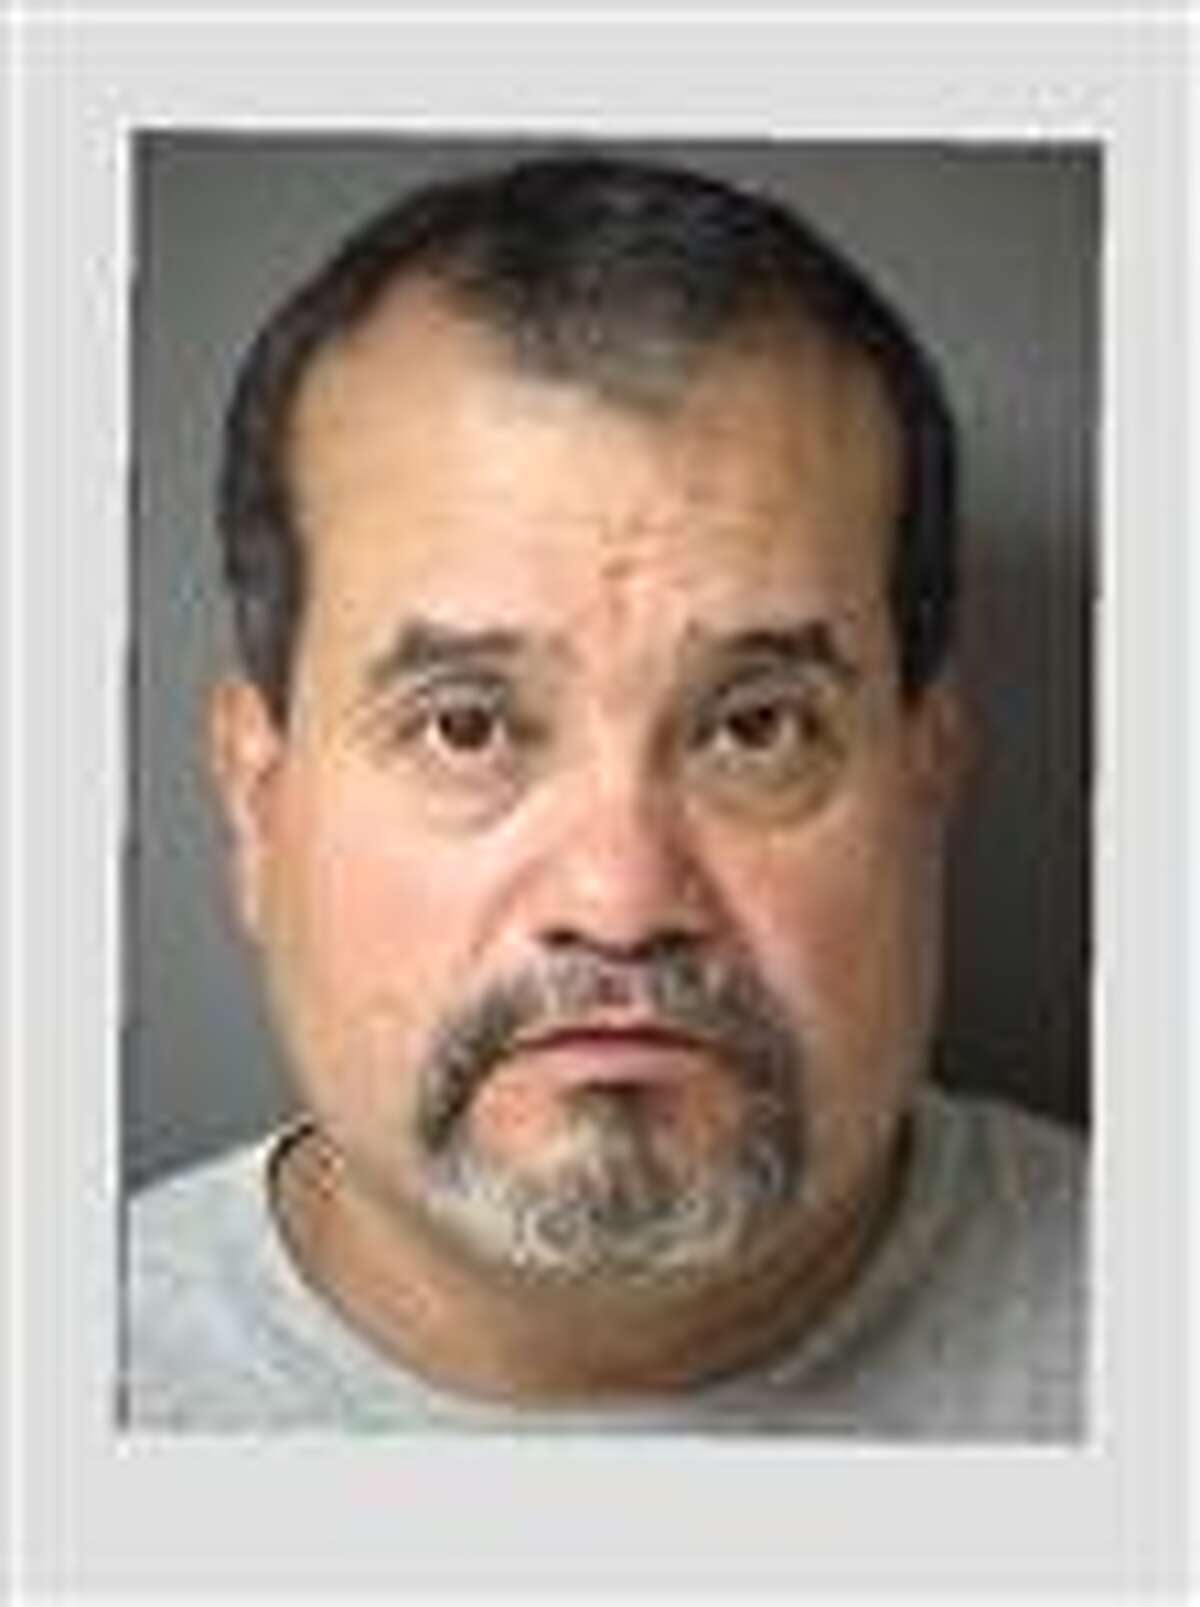 Sex offender charged in girlfriends murder image